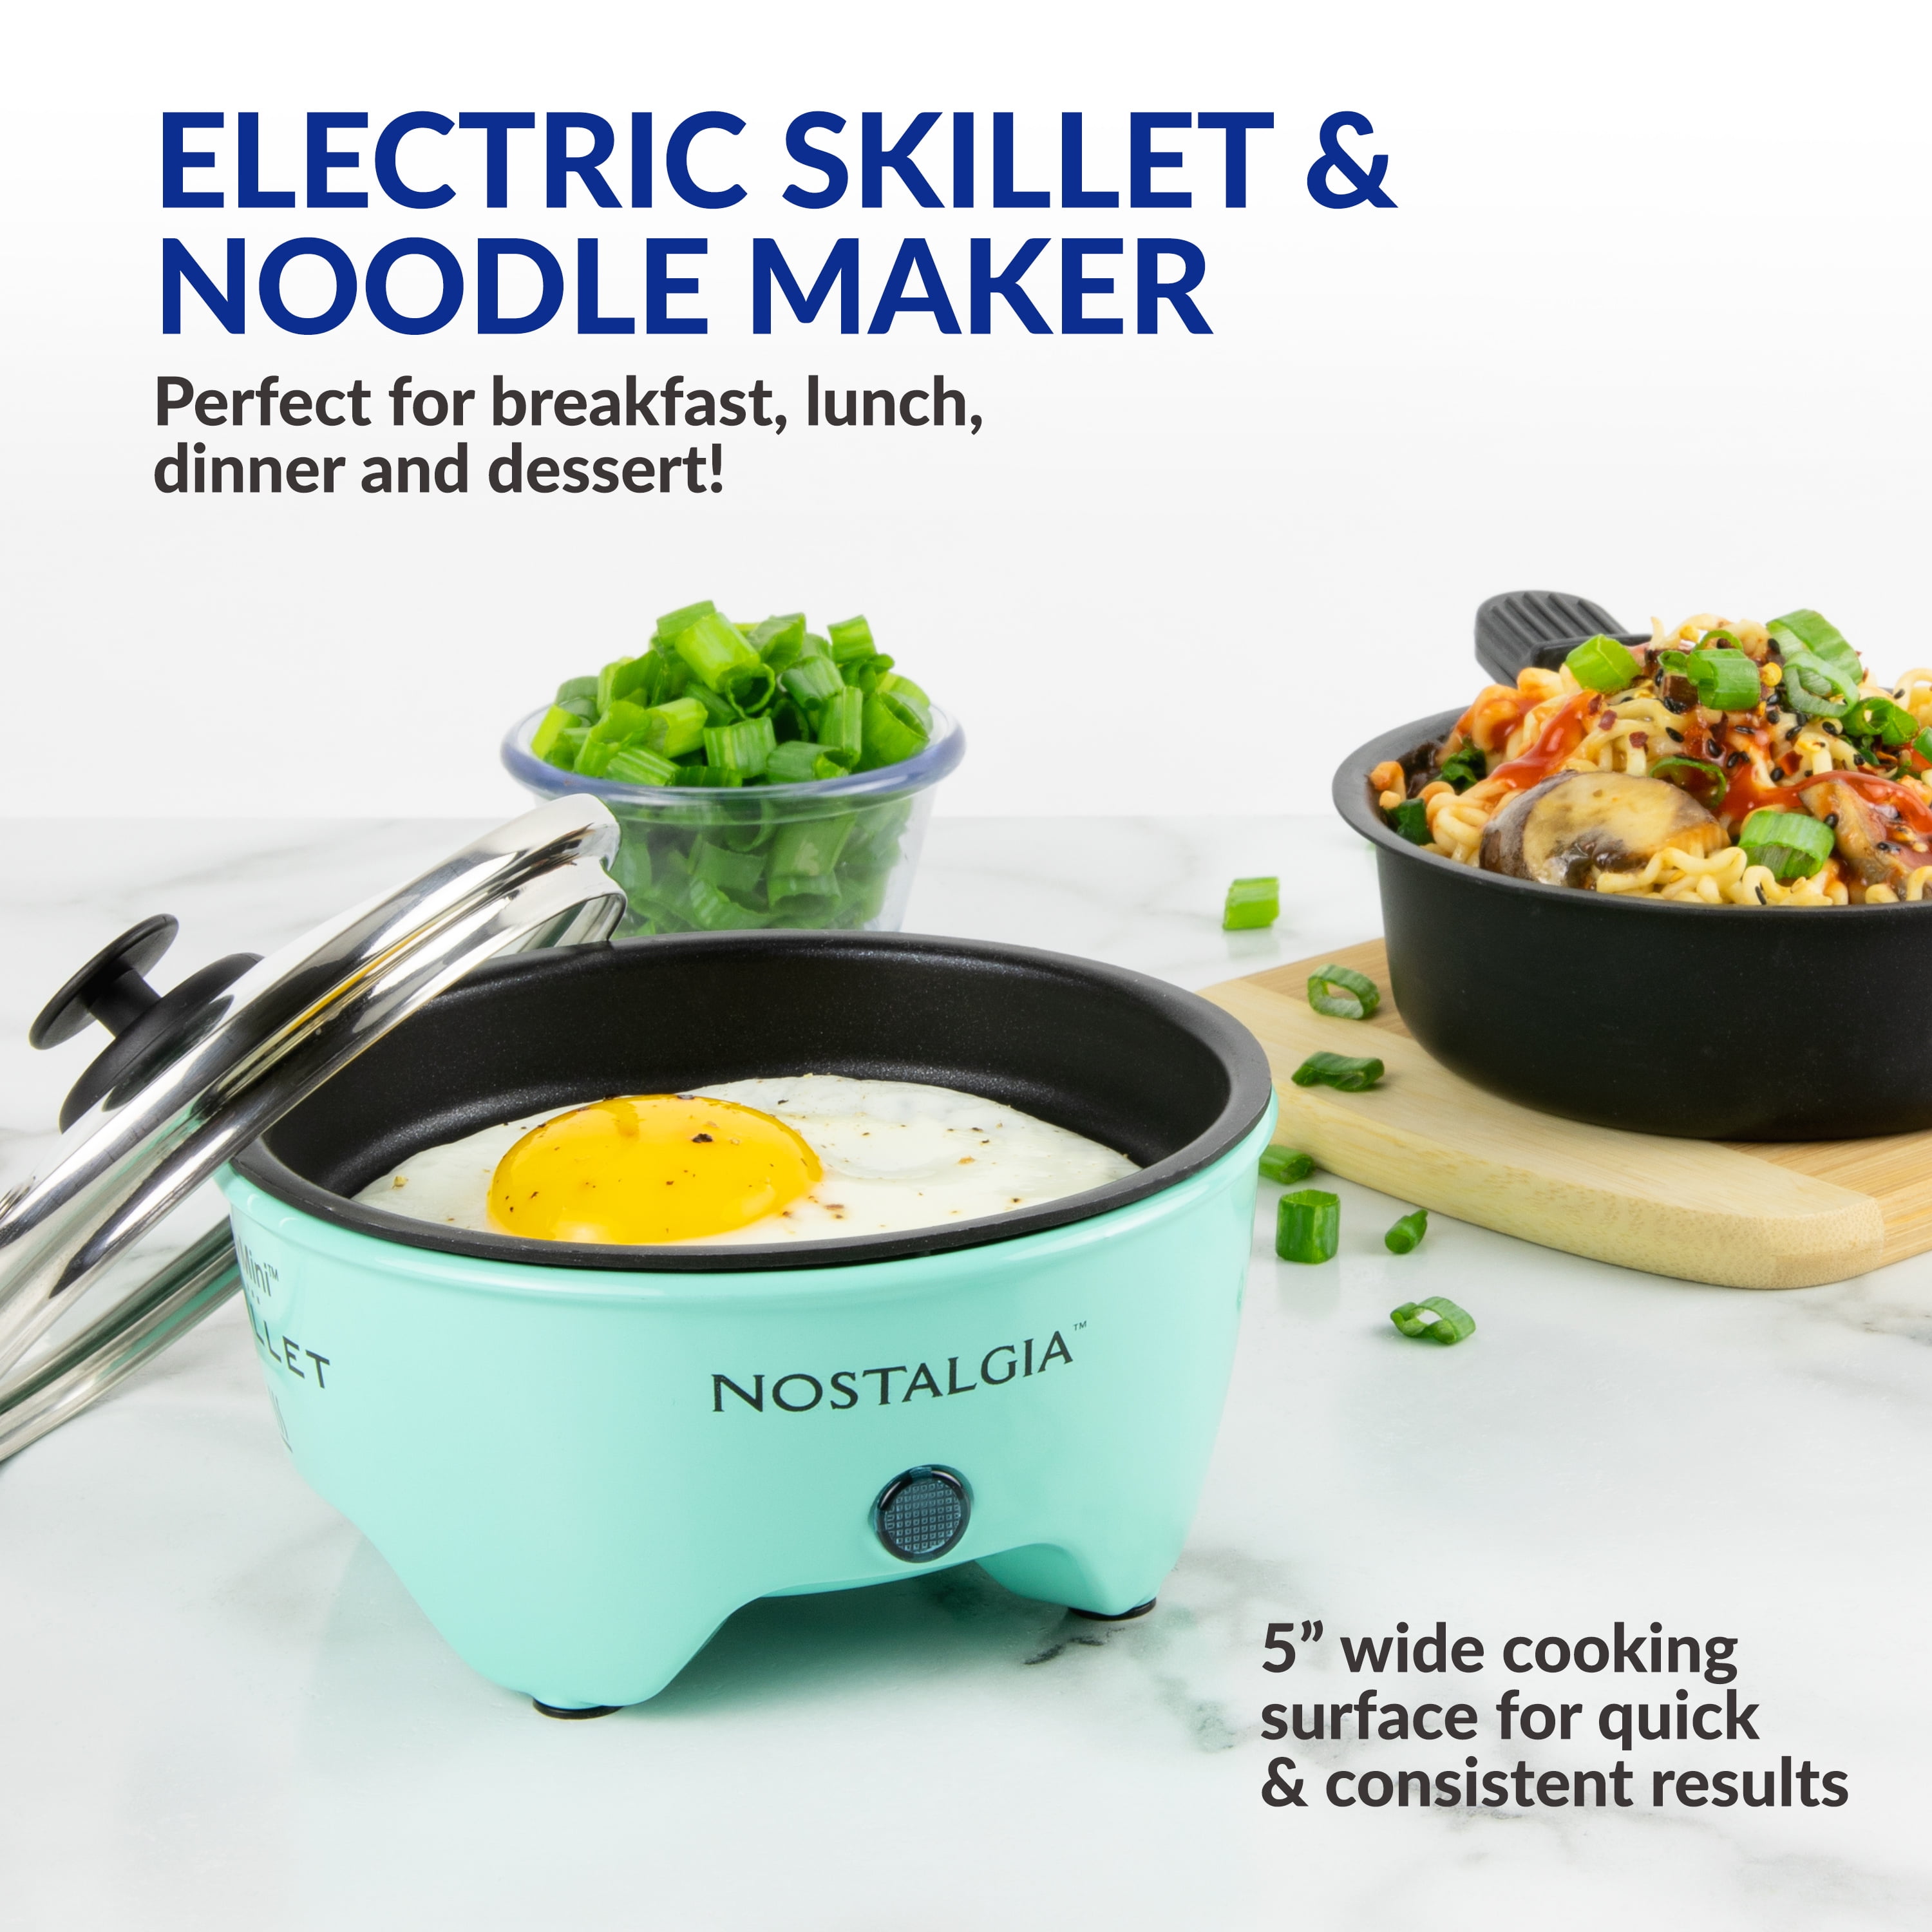 MyMini Noodle Cooker- Product Test 